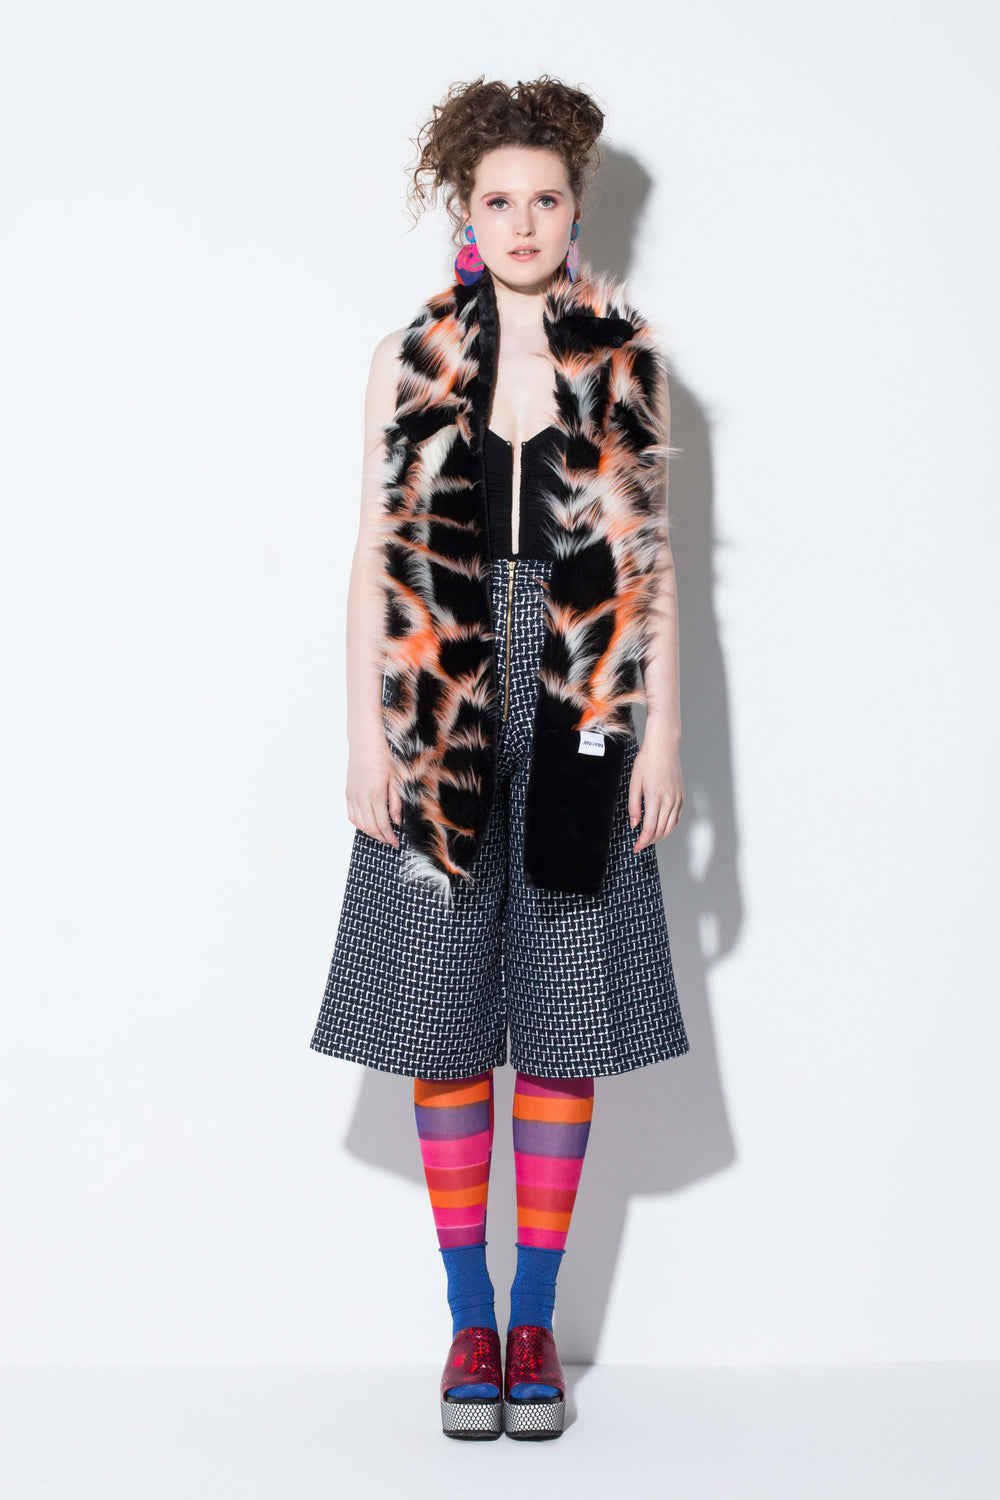 suitcase of memories| a fun faux fur scarf accessory in colour blocks from jin & yin styled with hand-painted tights